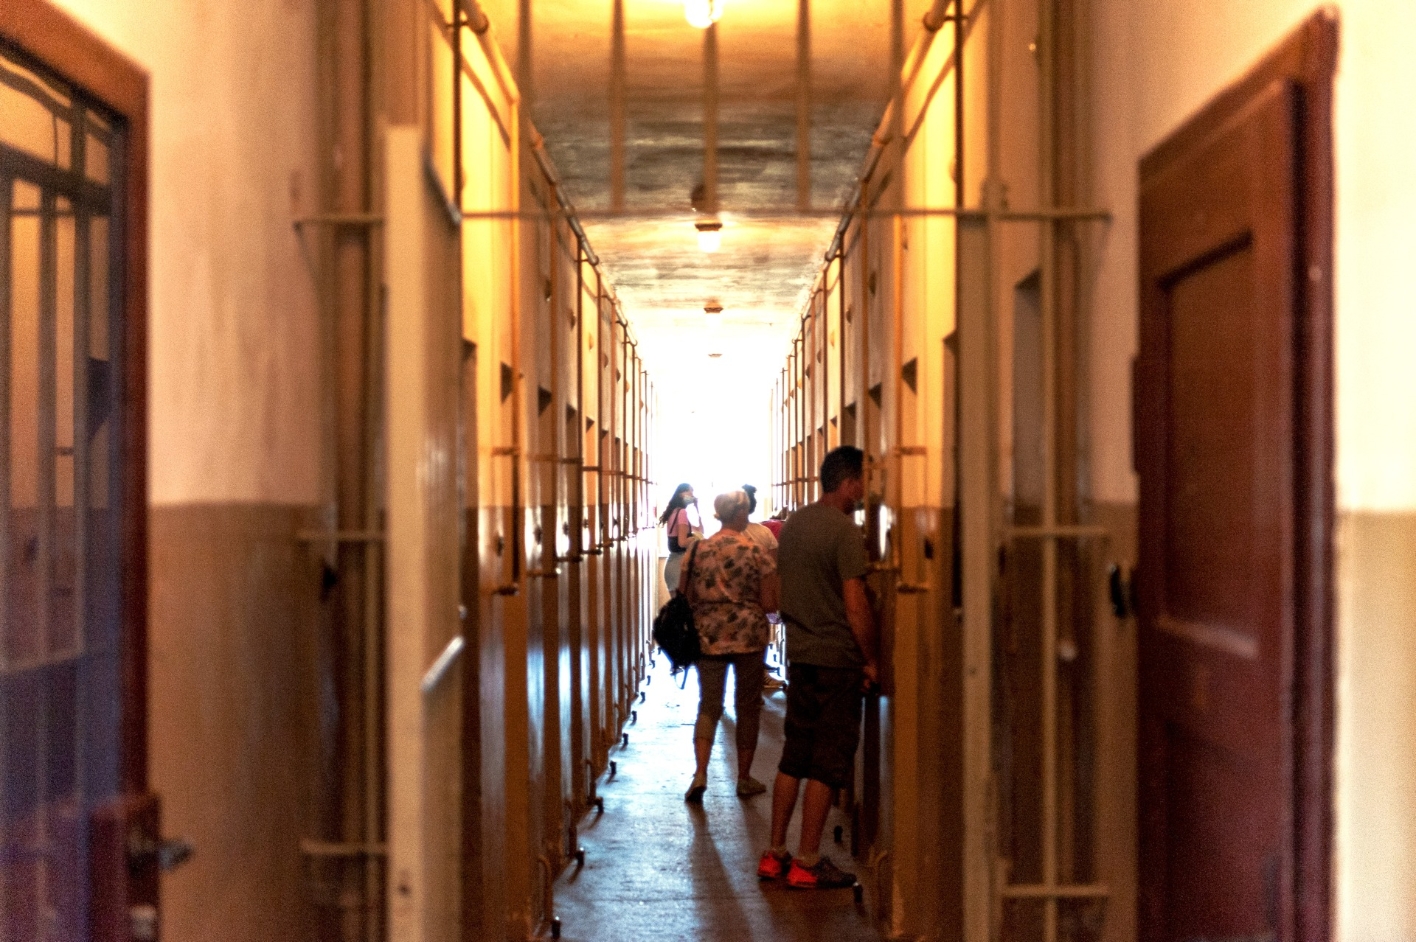 View into the cross corridor of the detention cell building. Individual visitors stand in front of various cells and look inside.